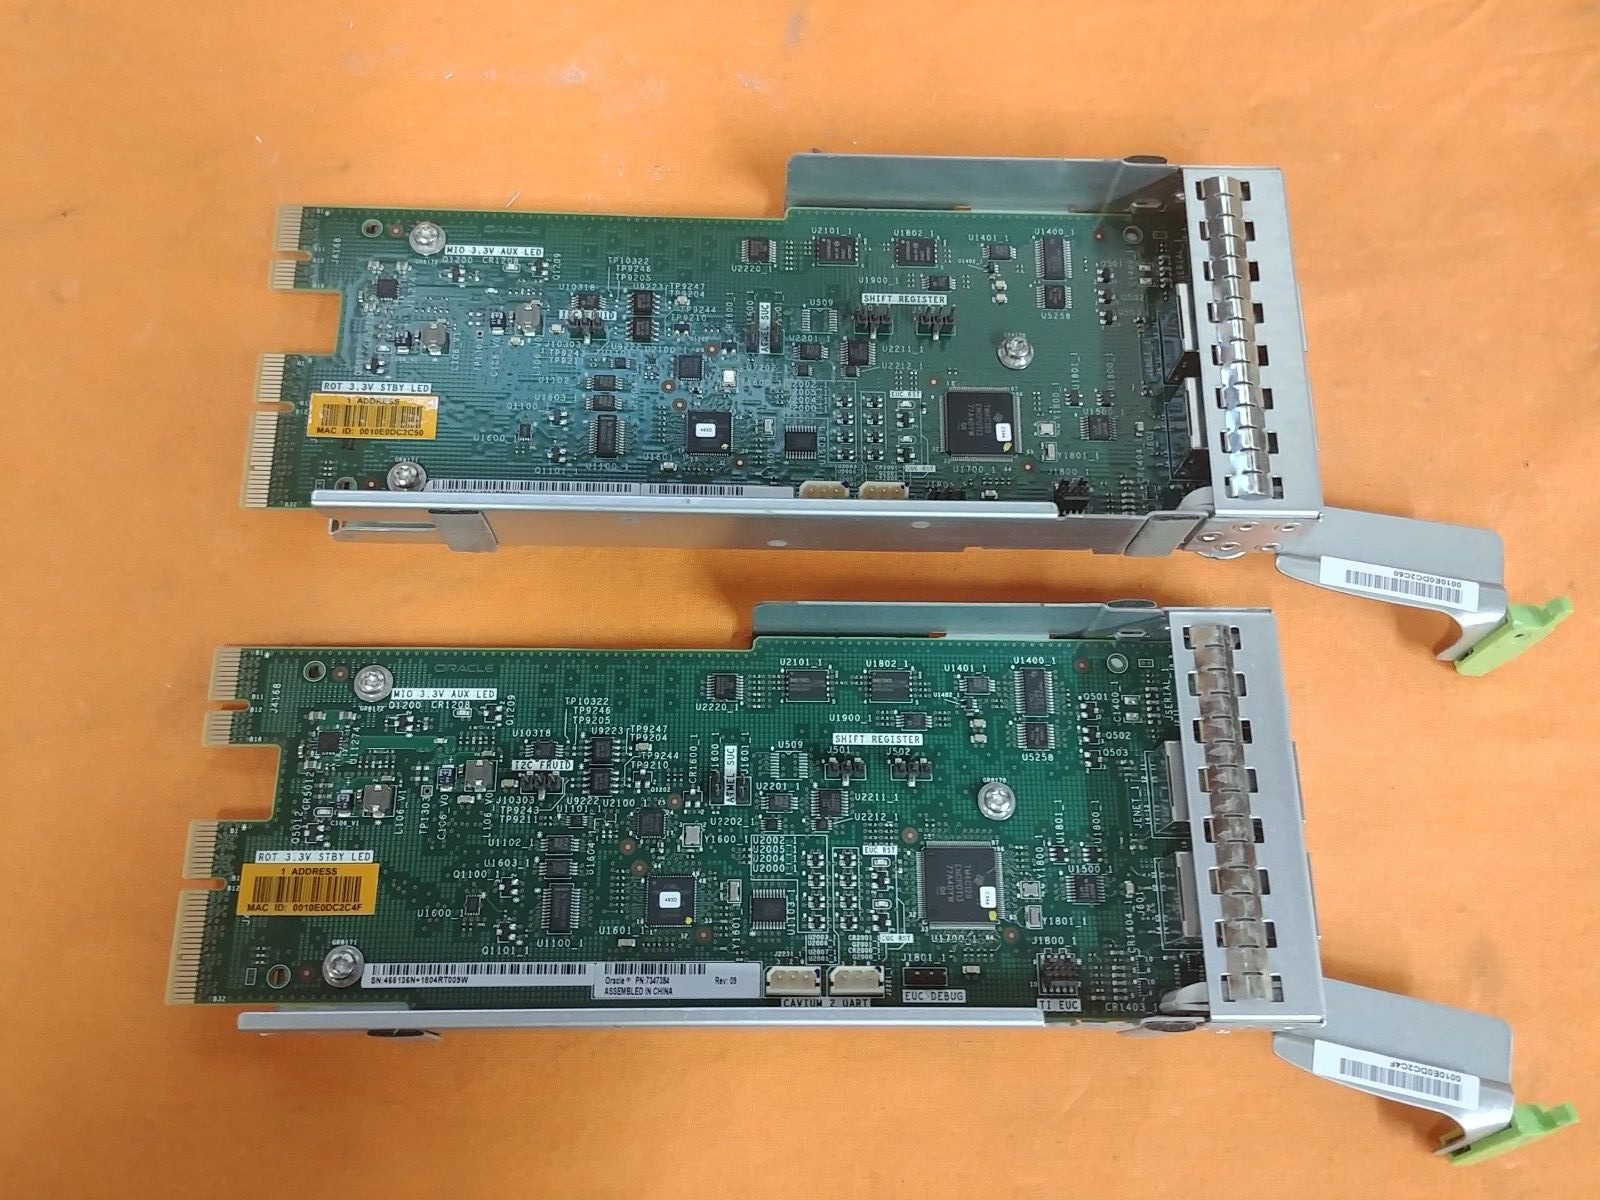 Lot of 2 Sun Oracle 7X-2c Server p/n: 7347384 Network Management cards